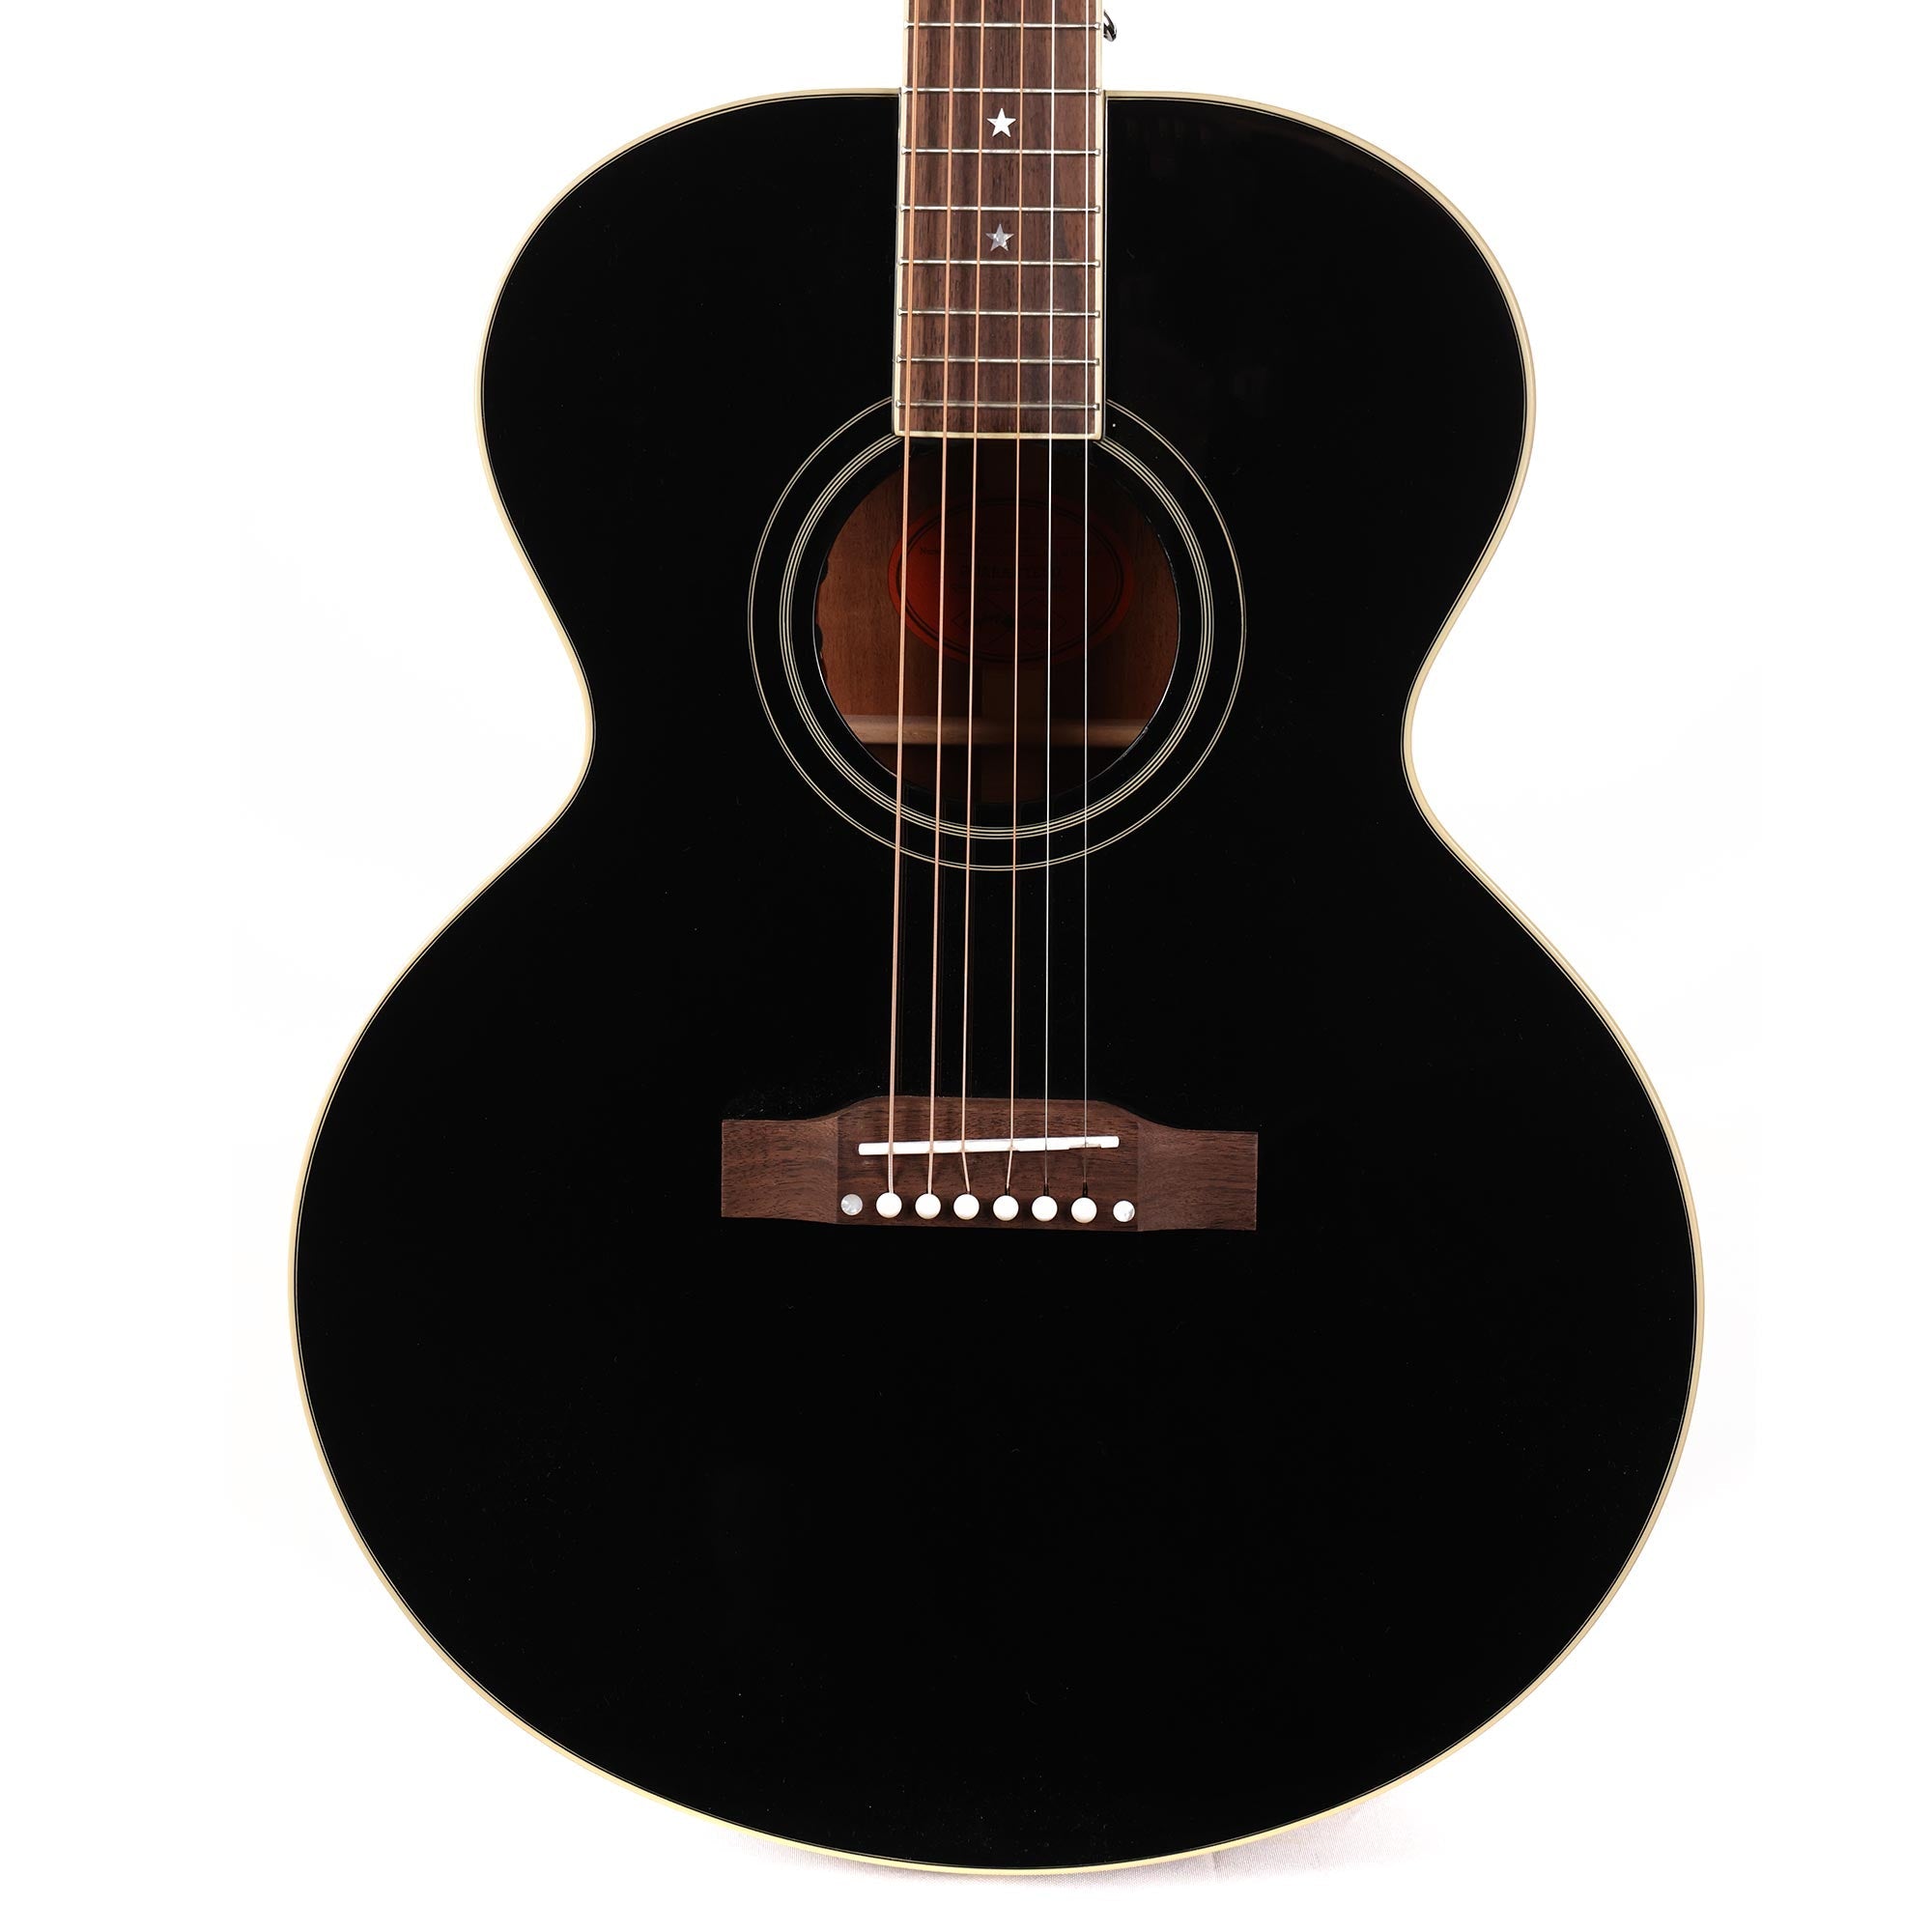 Epiphone Inspired by Gibson J-180 LS Acoustic-Electric Ebony | The Music Zoo